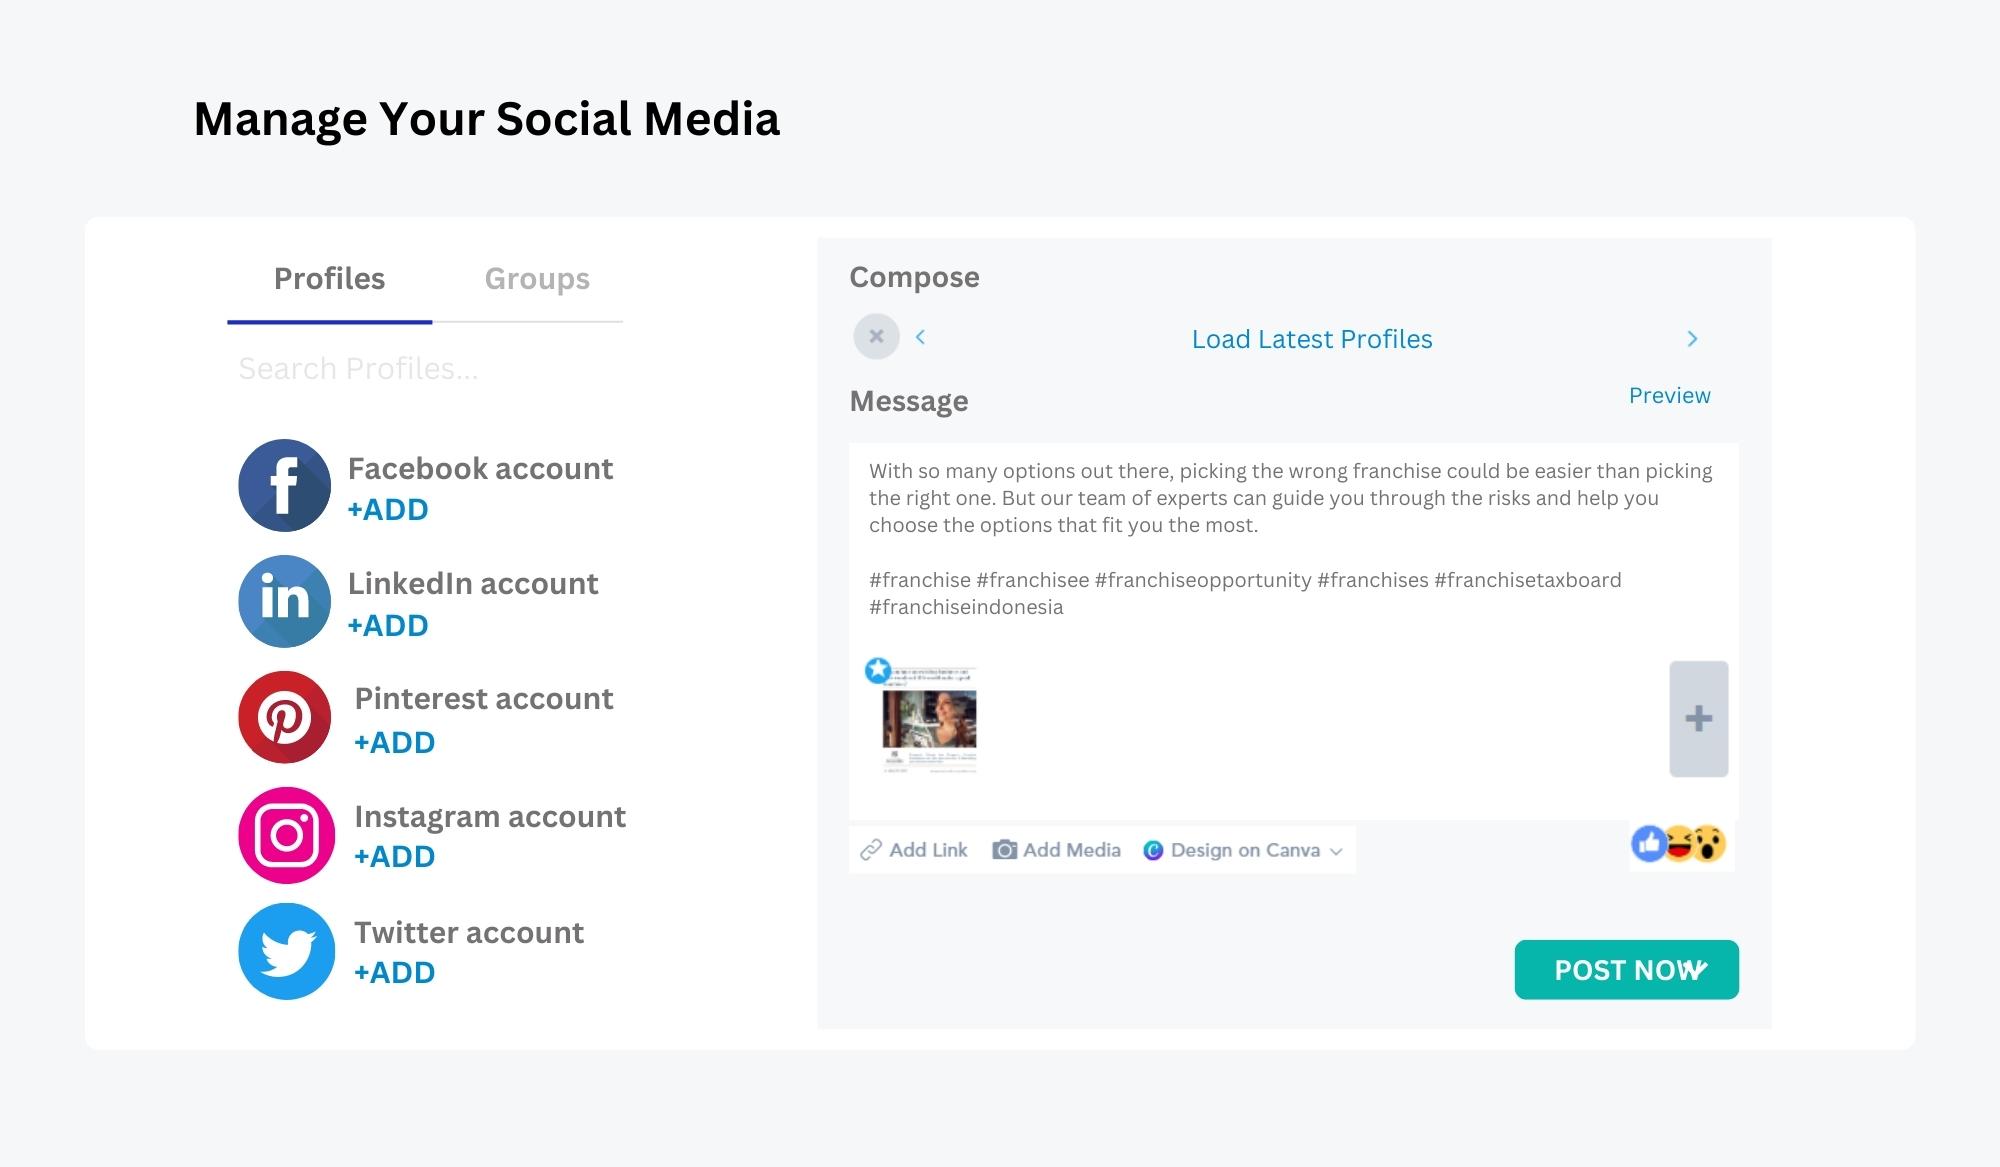 Easily control all your social media channels from one place without the need to manage them separately.